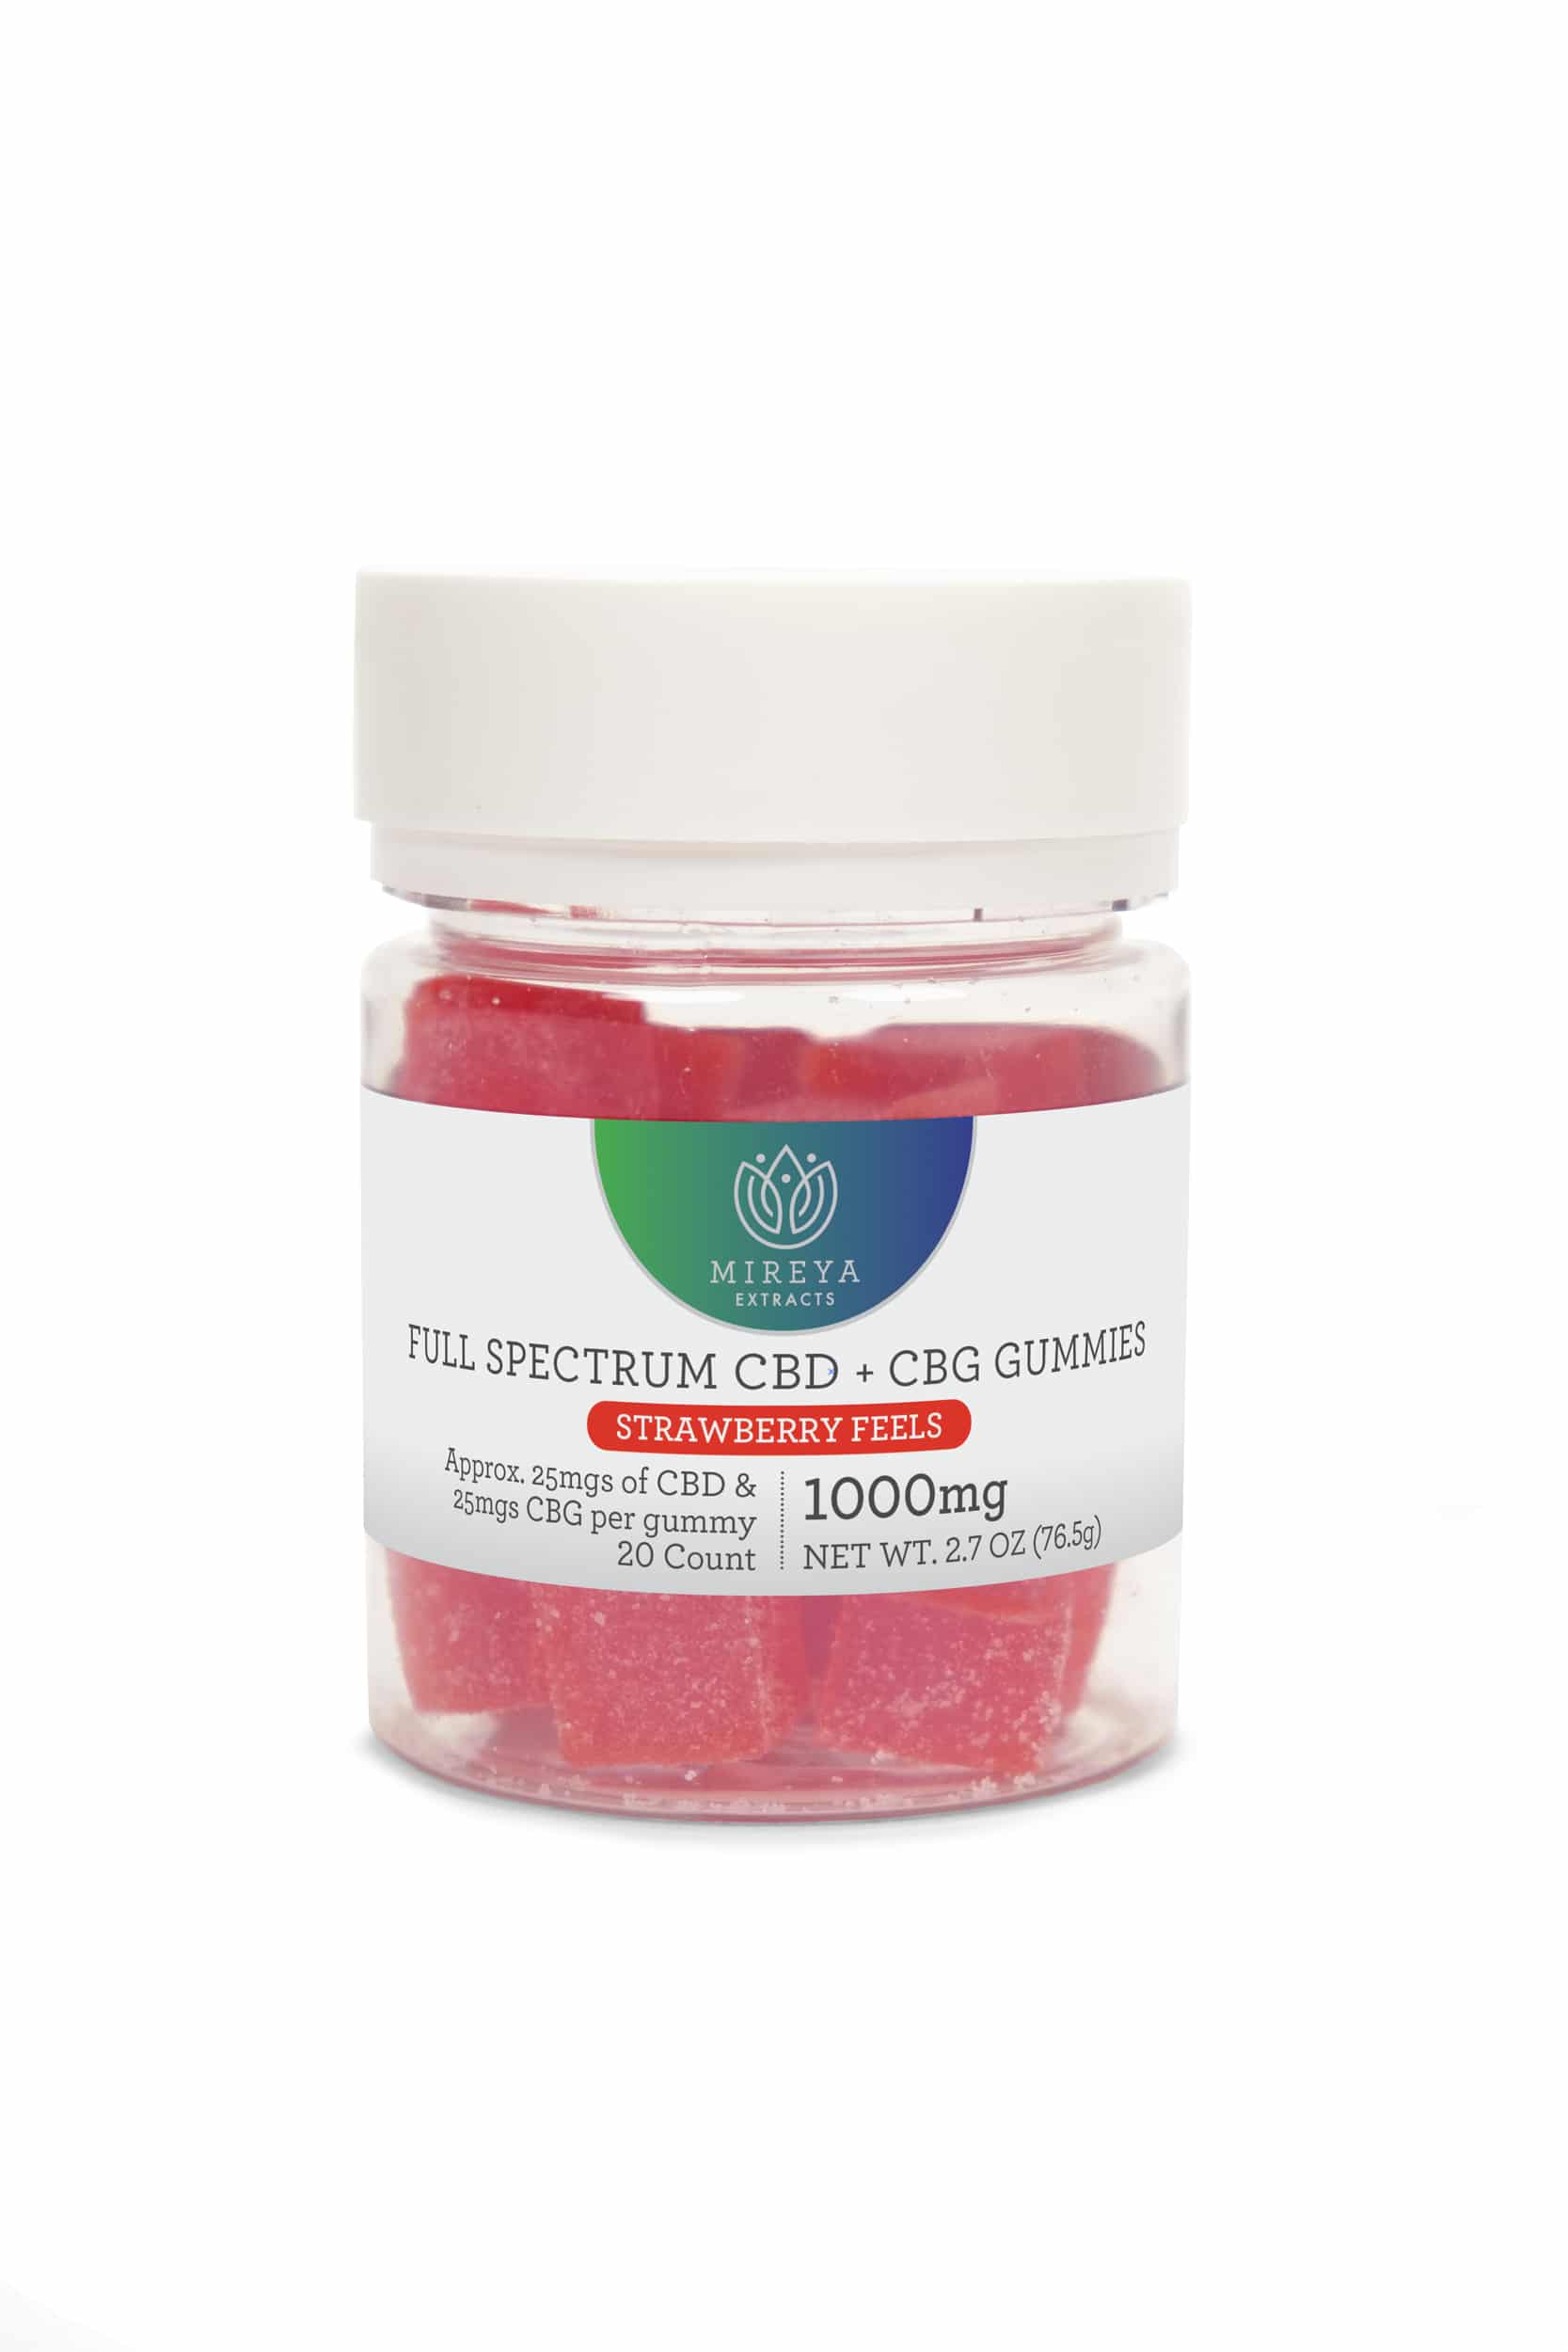 Mireya Extracts Strawberry Feels – Monthly Subscription